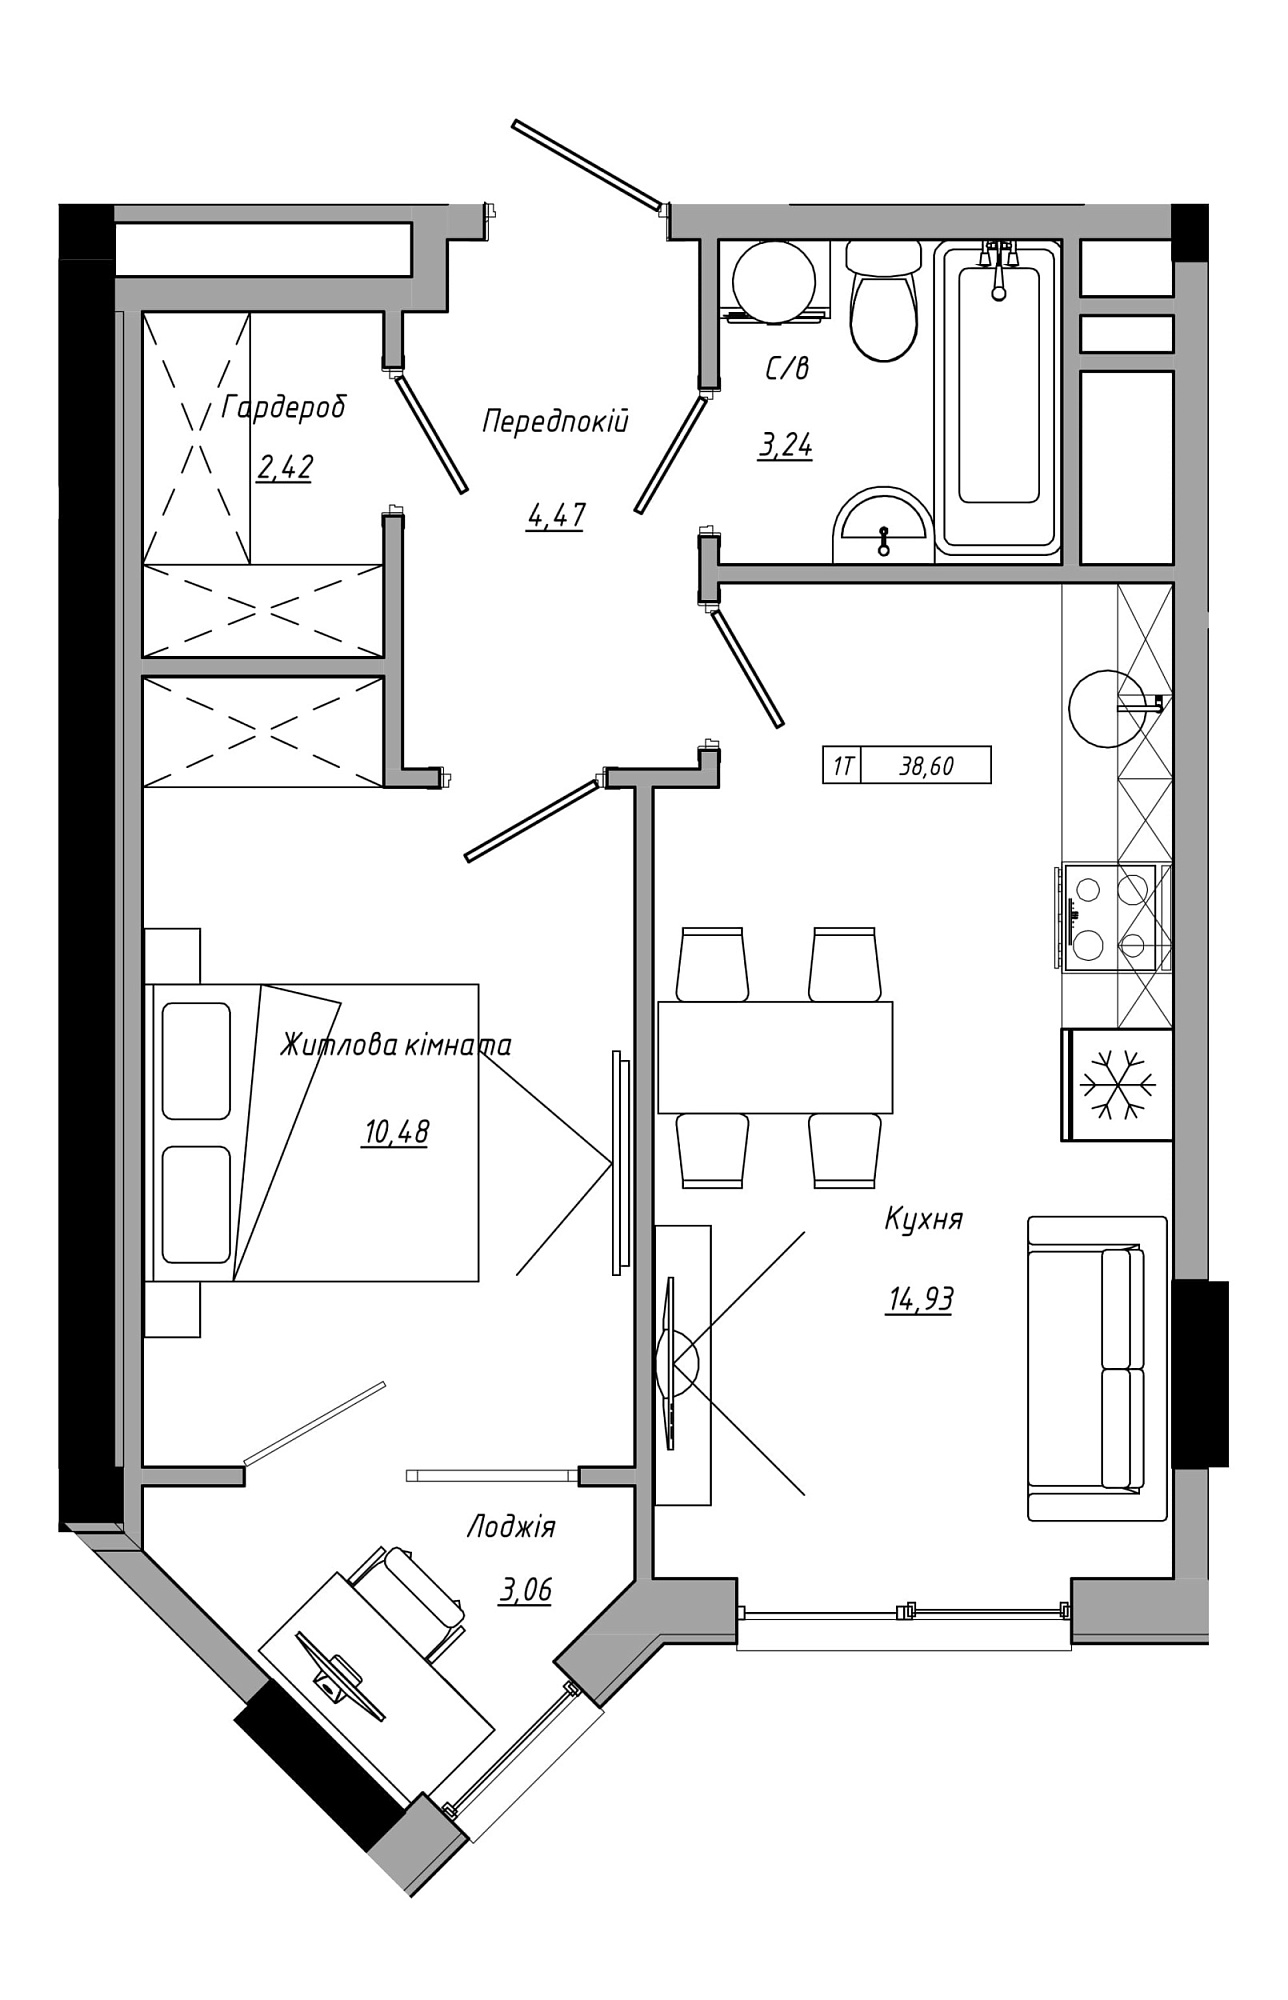 Planning 1-rm flats area 38.6m2, AB-21-07/00022.